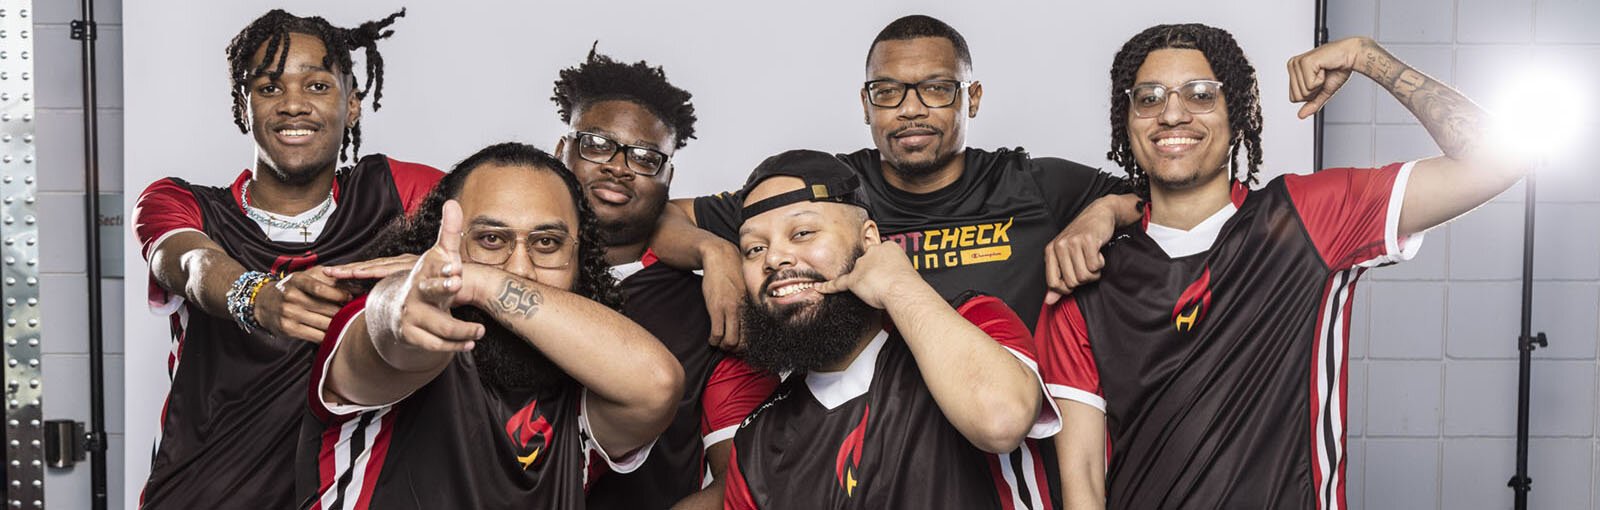 HEATCheck Gaming, with Jackson native Detuaine "Dee" Tucker Jr. at far right.